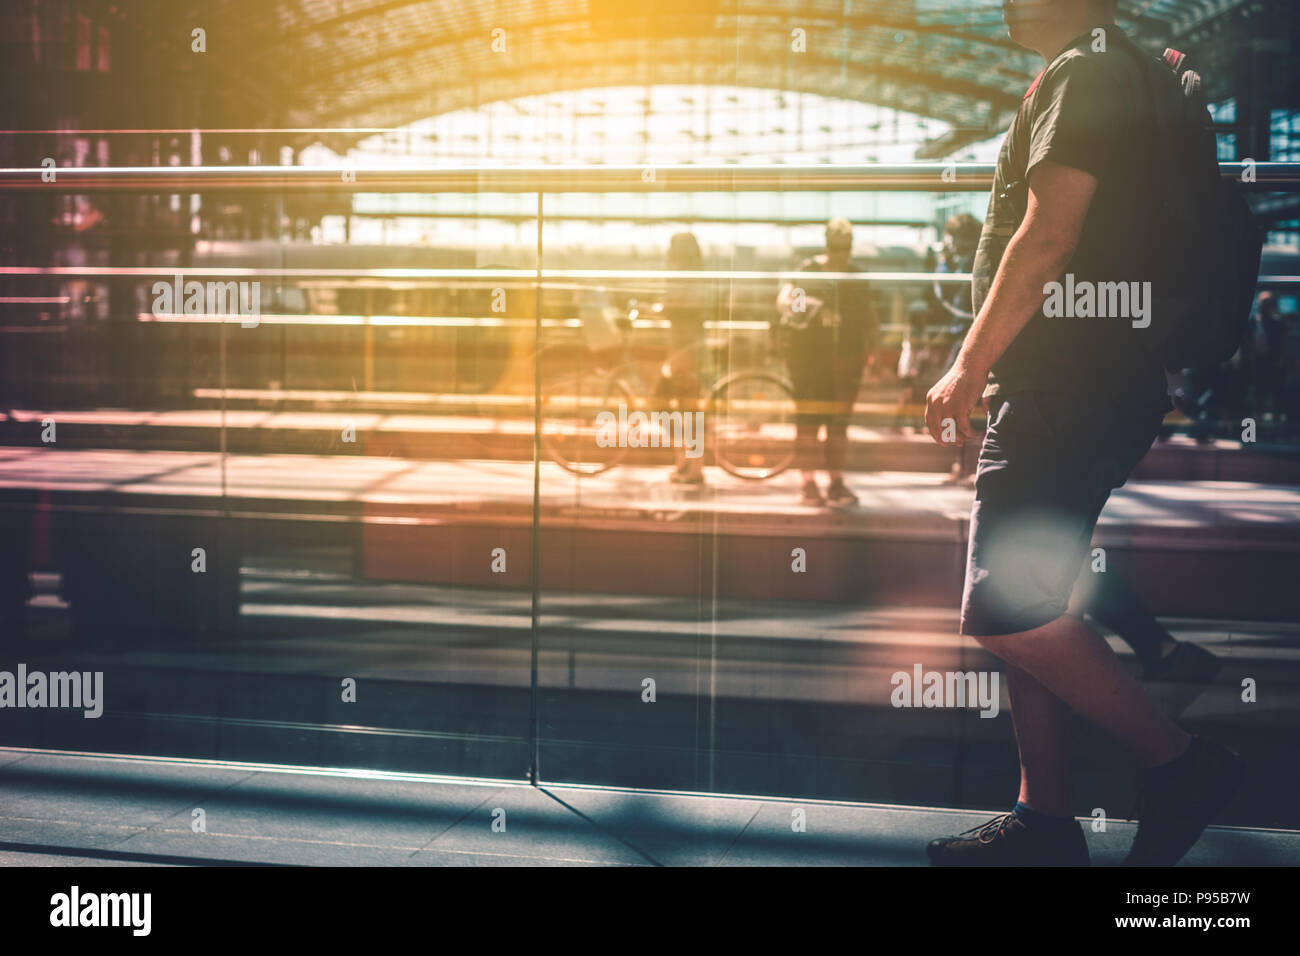 Travel concept, people with luggage walking on train station platform Stock Photo